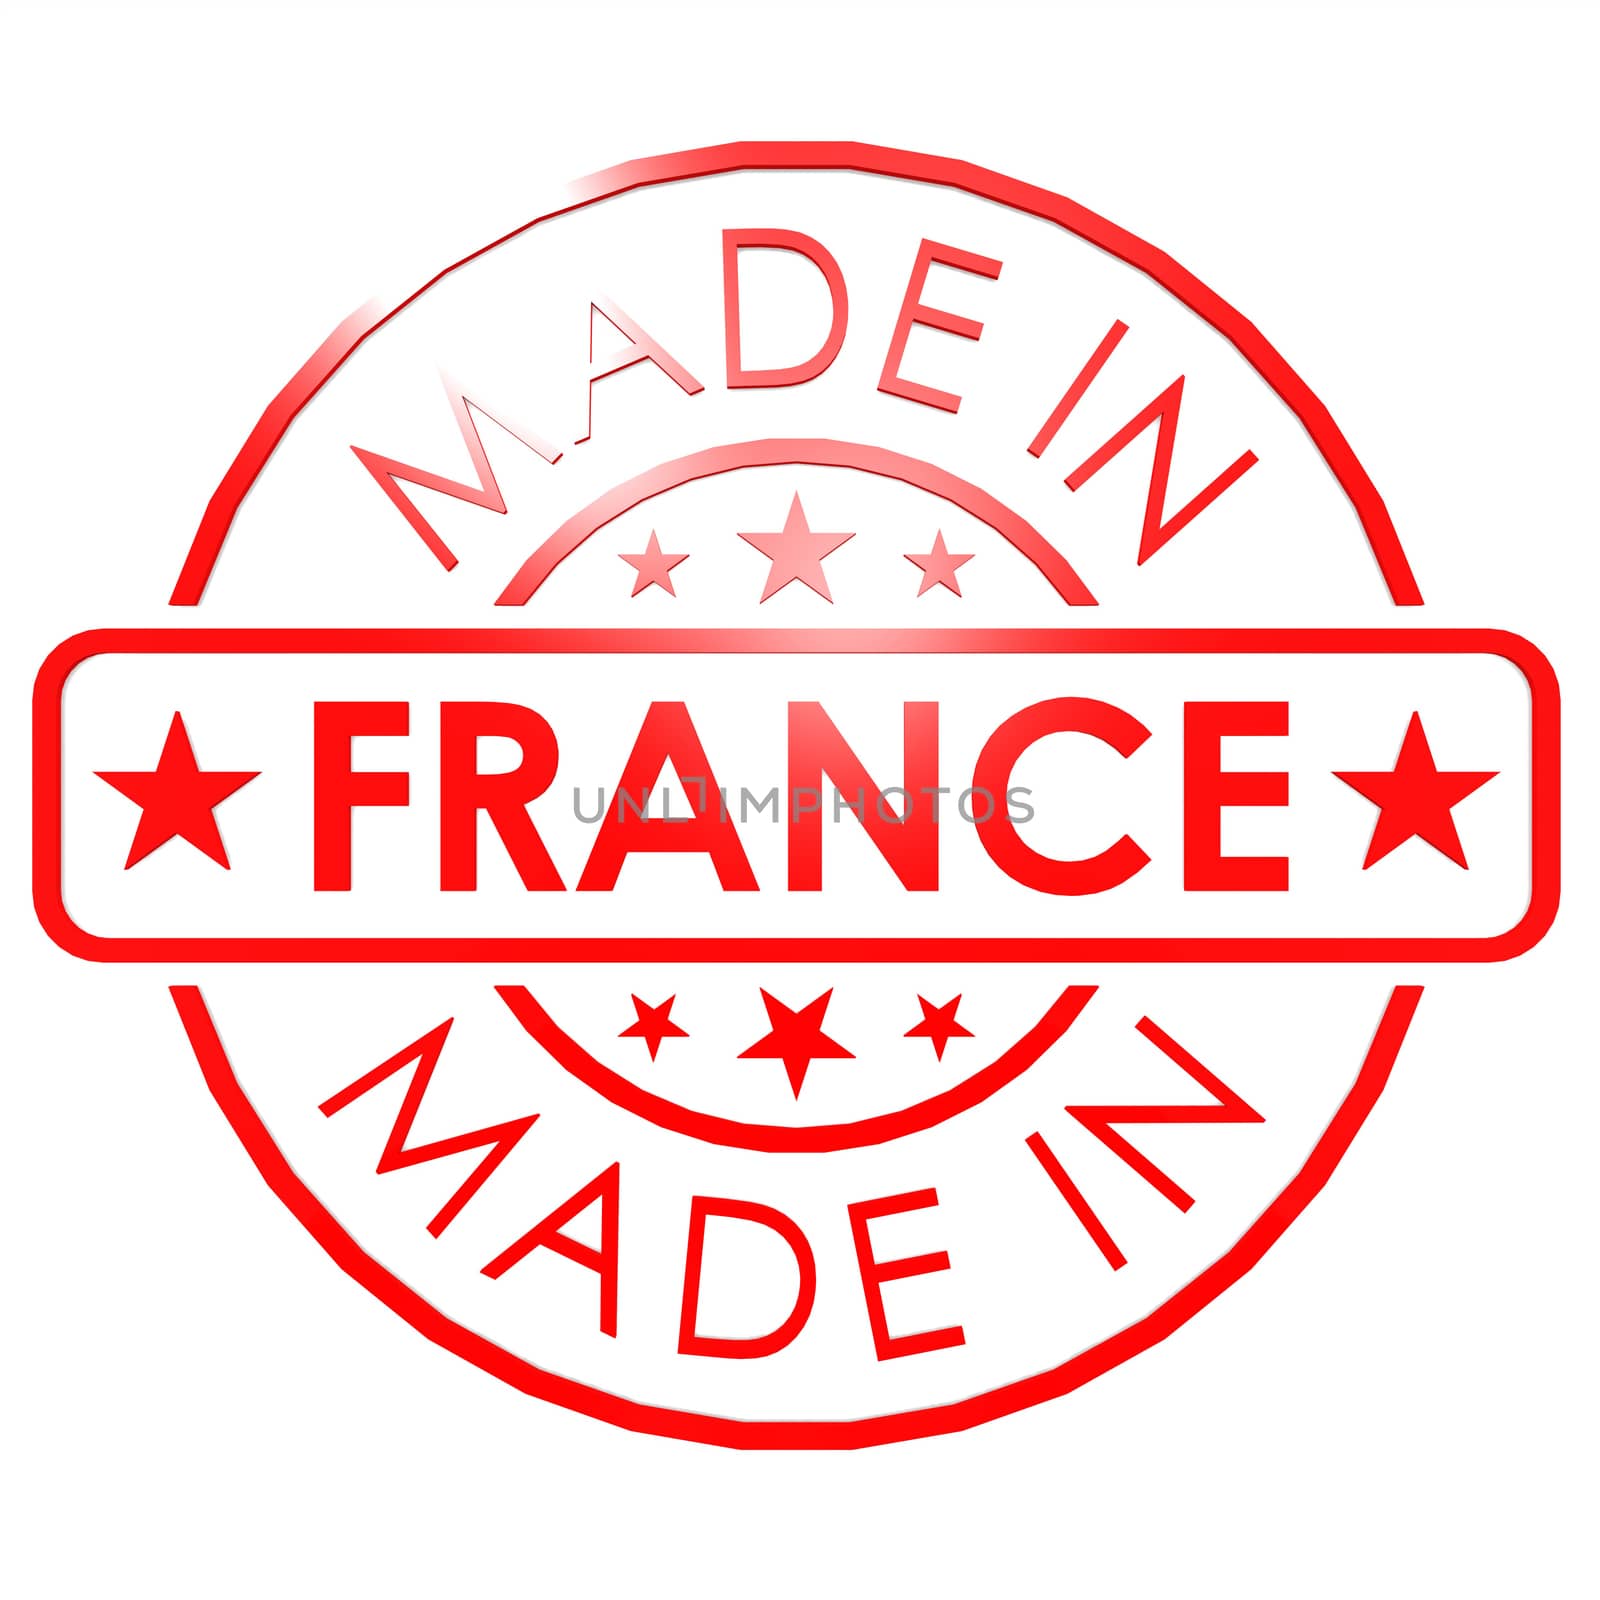 Made in France red seal